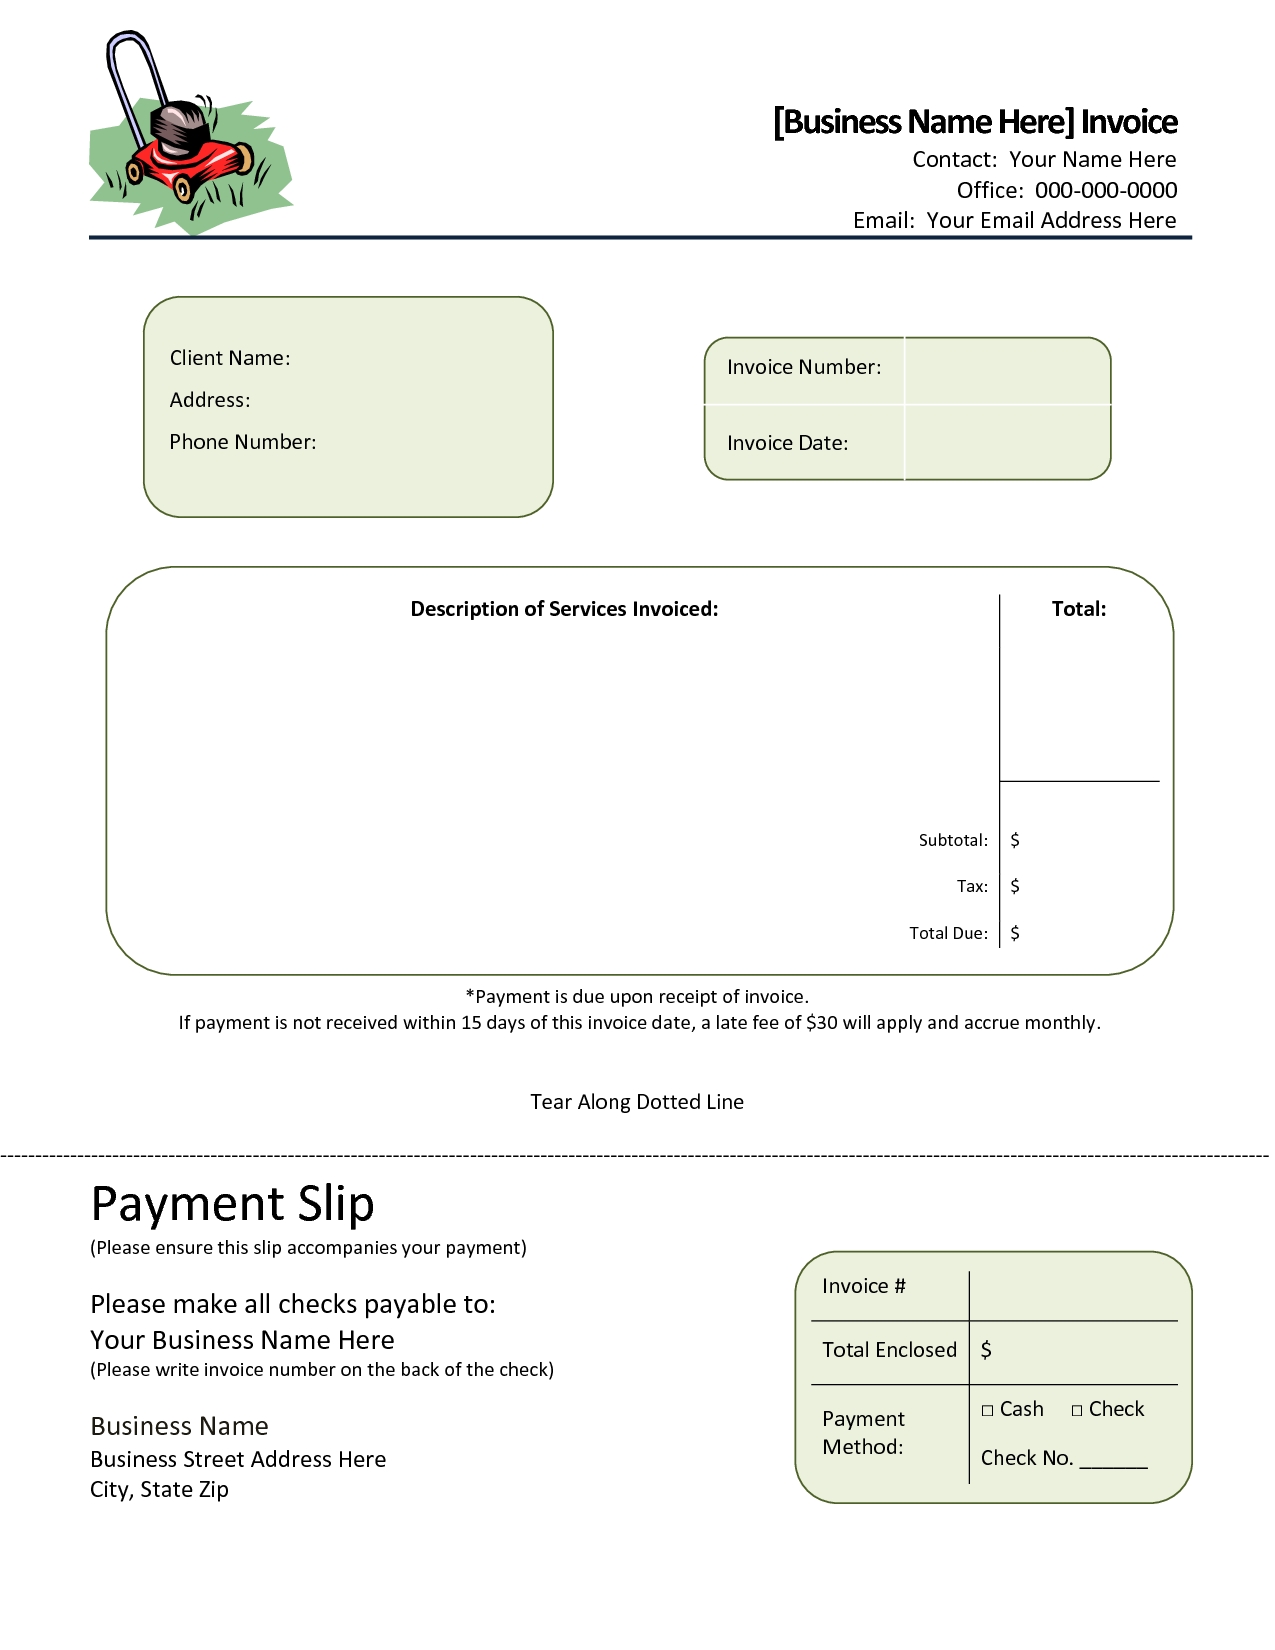 11 landscaping invoice top invoice templates top invoice templates landscape invoice template